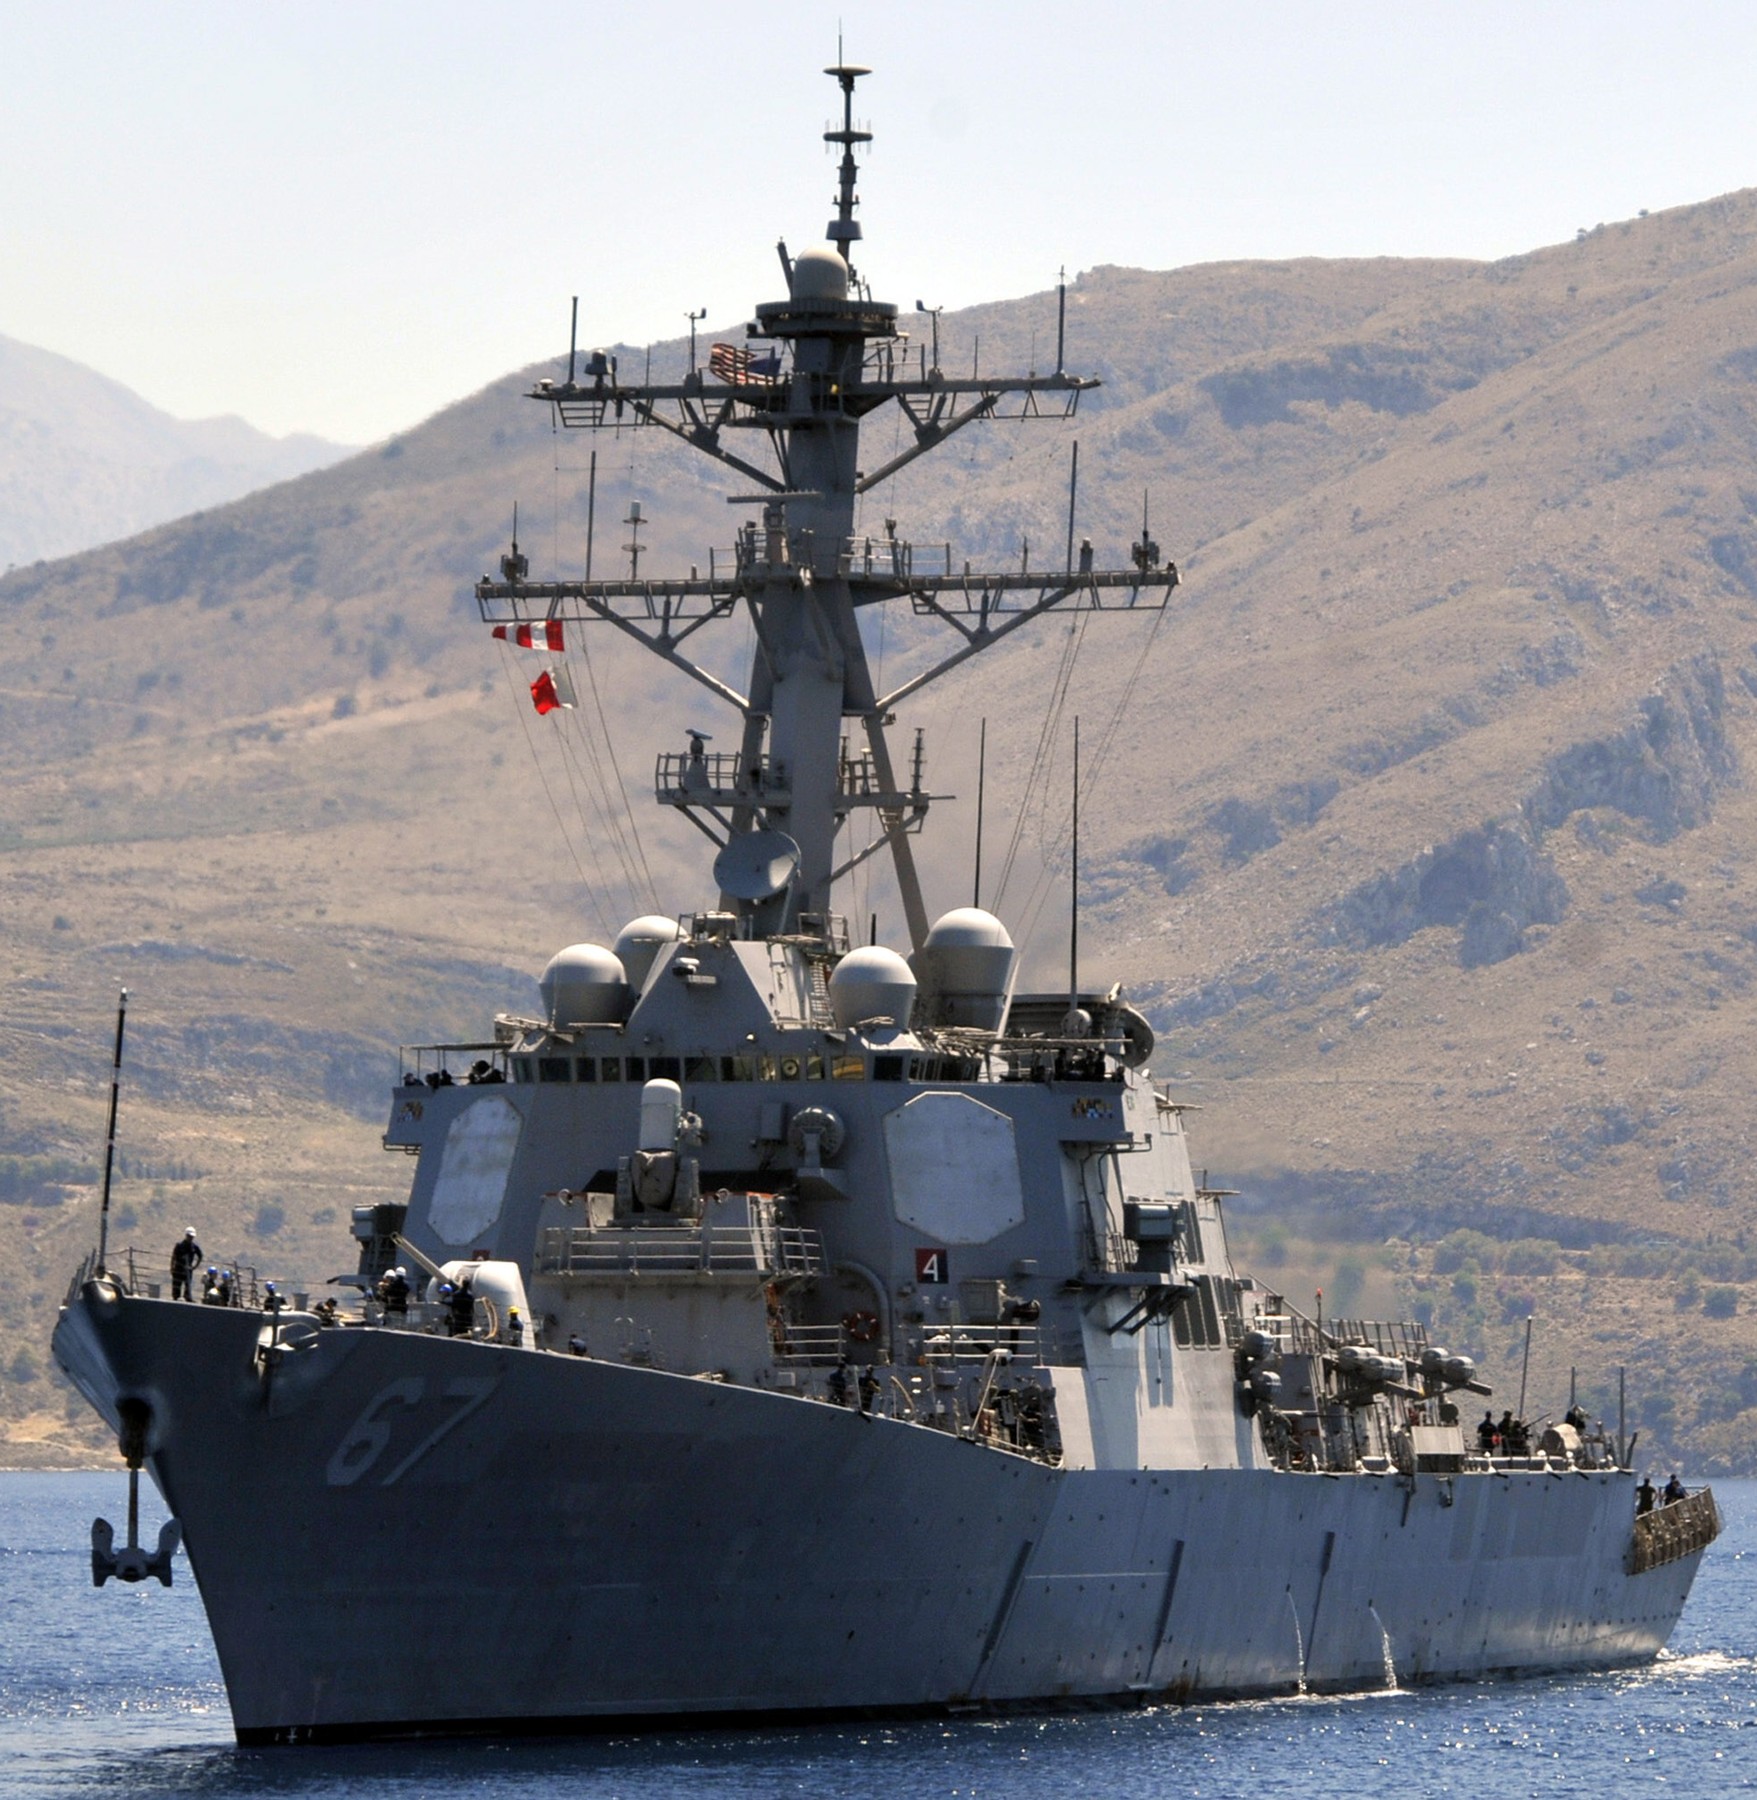 ddg-67 uss cole guided missile destroyer arleigh burke class navy aegis 23